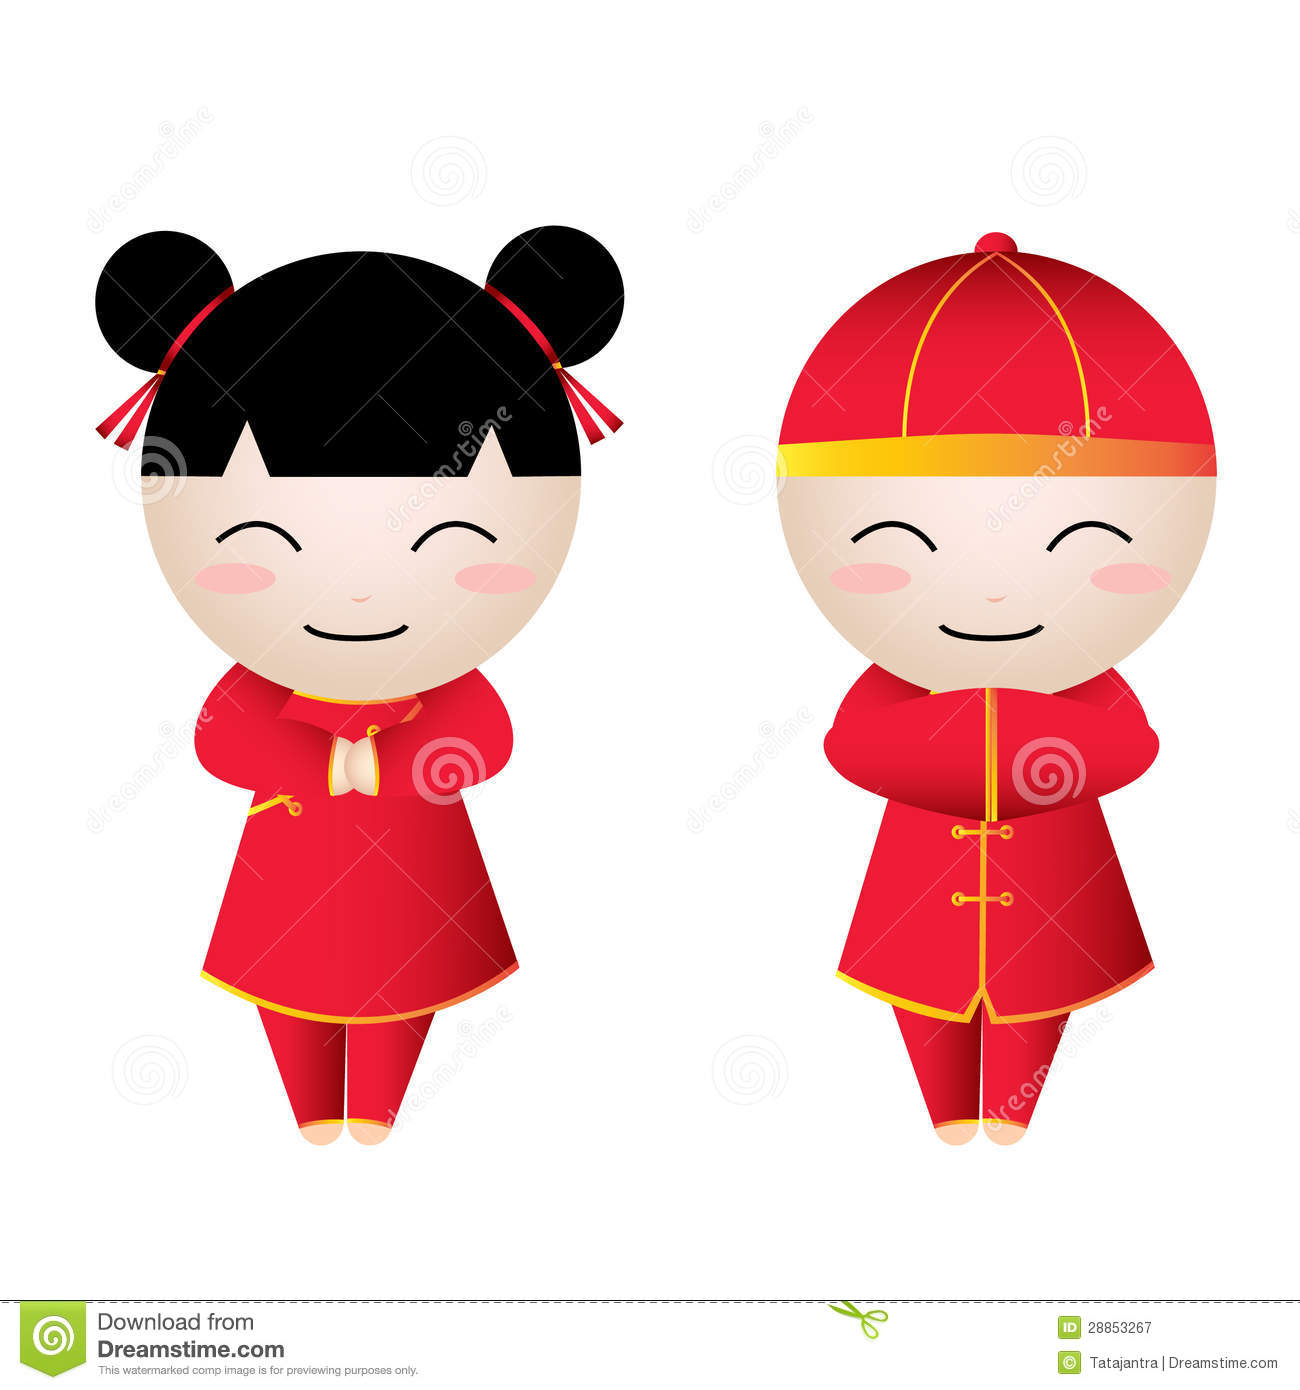 Pencil and in color. Chinese clipart kid chinese